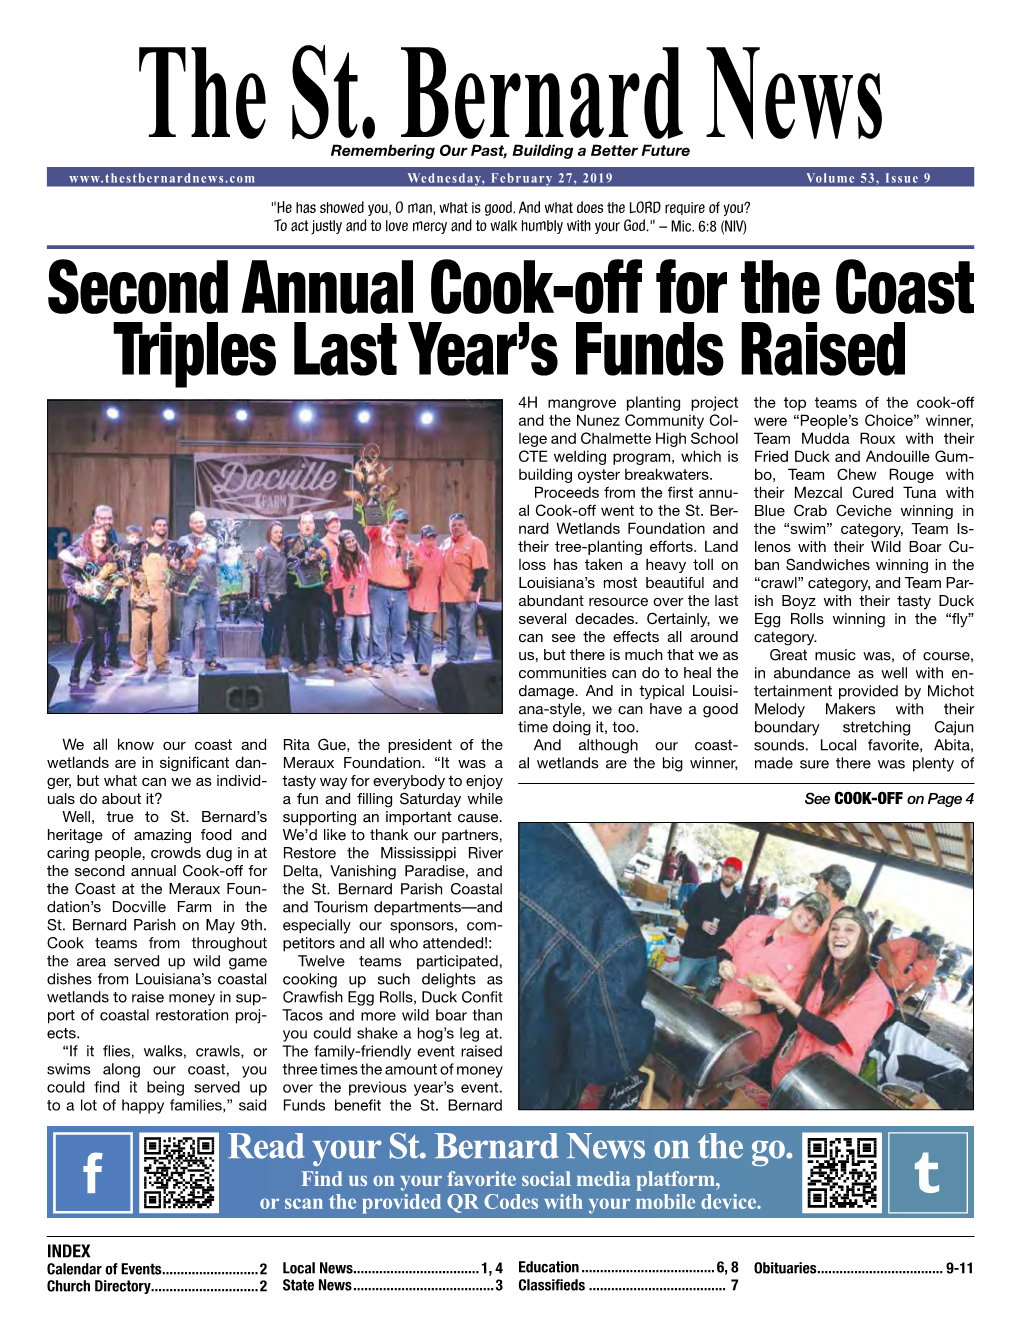 Second Annual Cook-Off for the Coast Triples Last